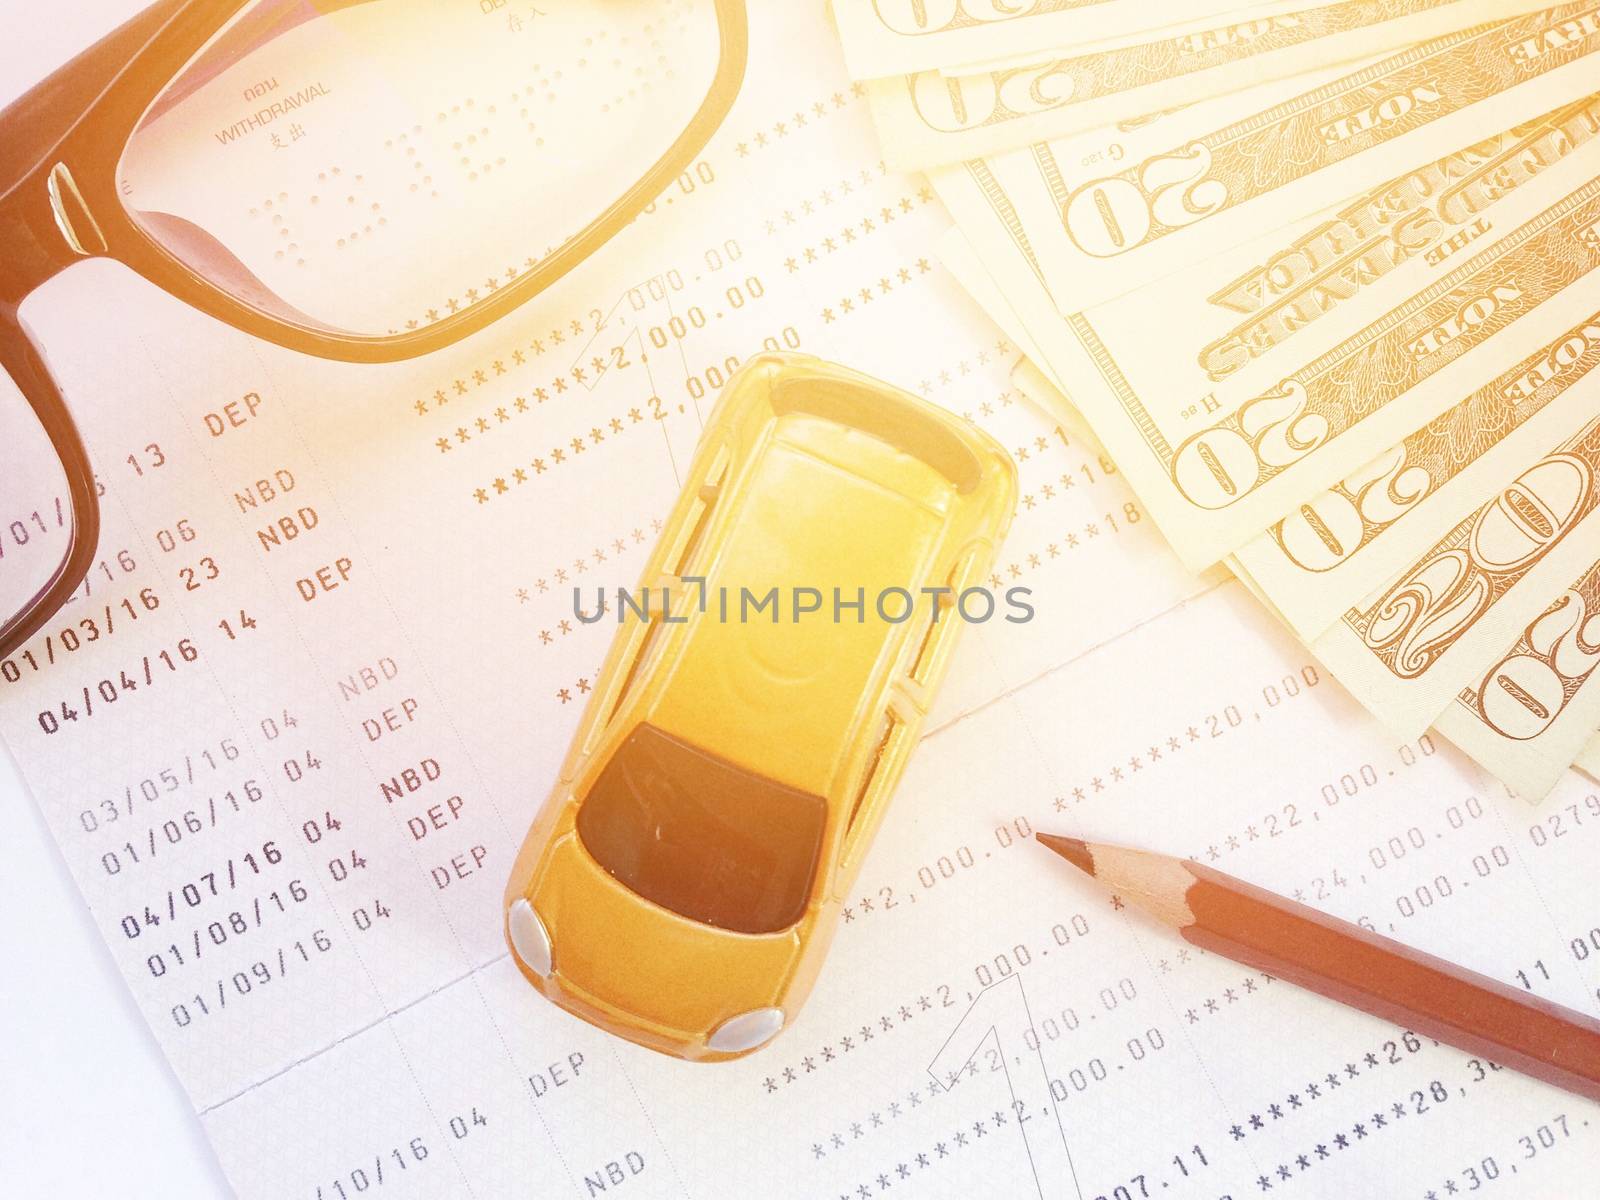 Business, finance, savings, banking or car loan concept : Miniature car model, pencil, eyeglasses, money and savings account passbook or financial statement on white background